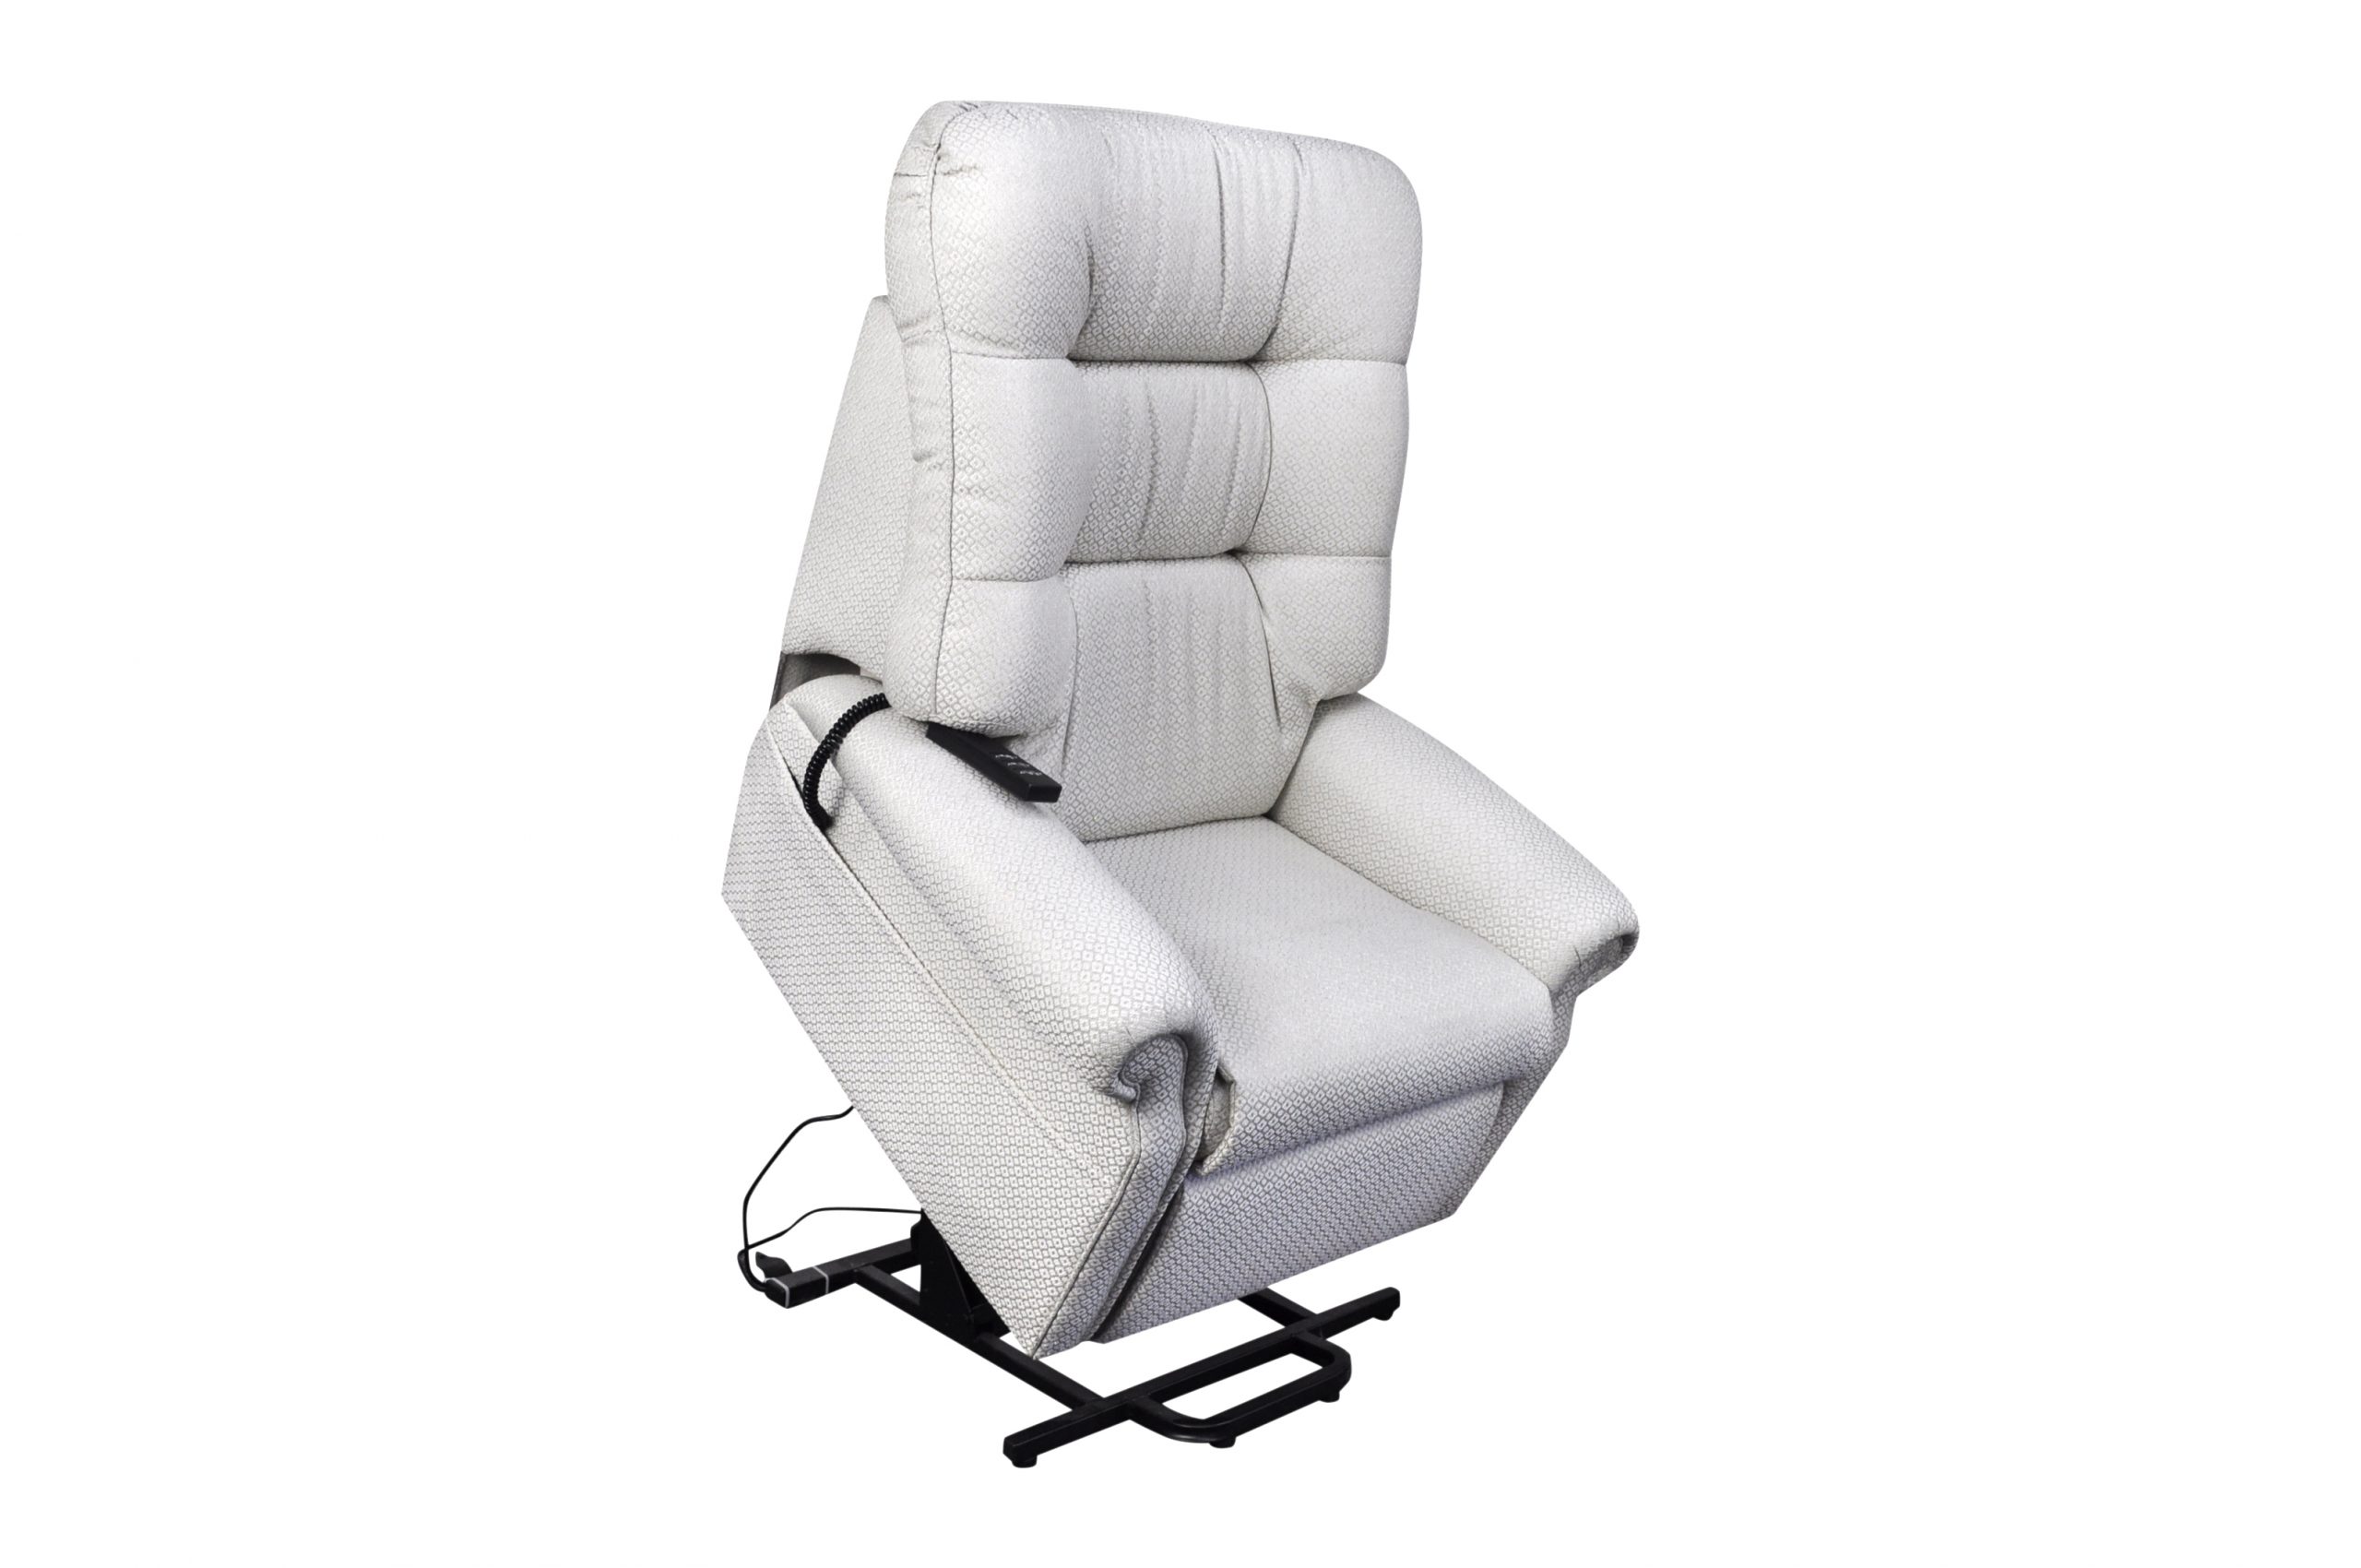 Bluesky Mobility Leigh – Lift Only Chair (Small)